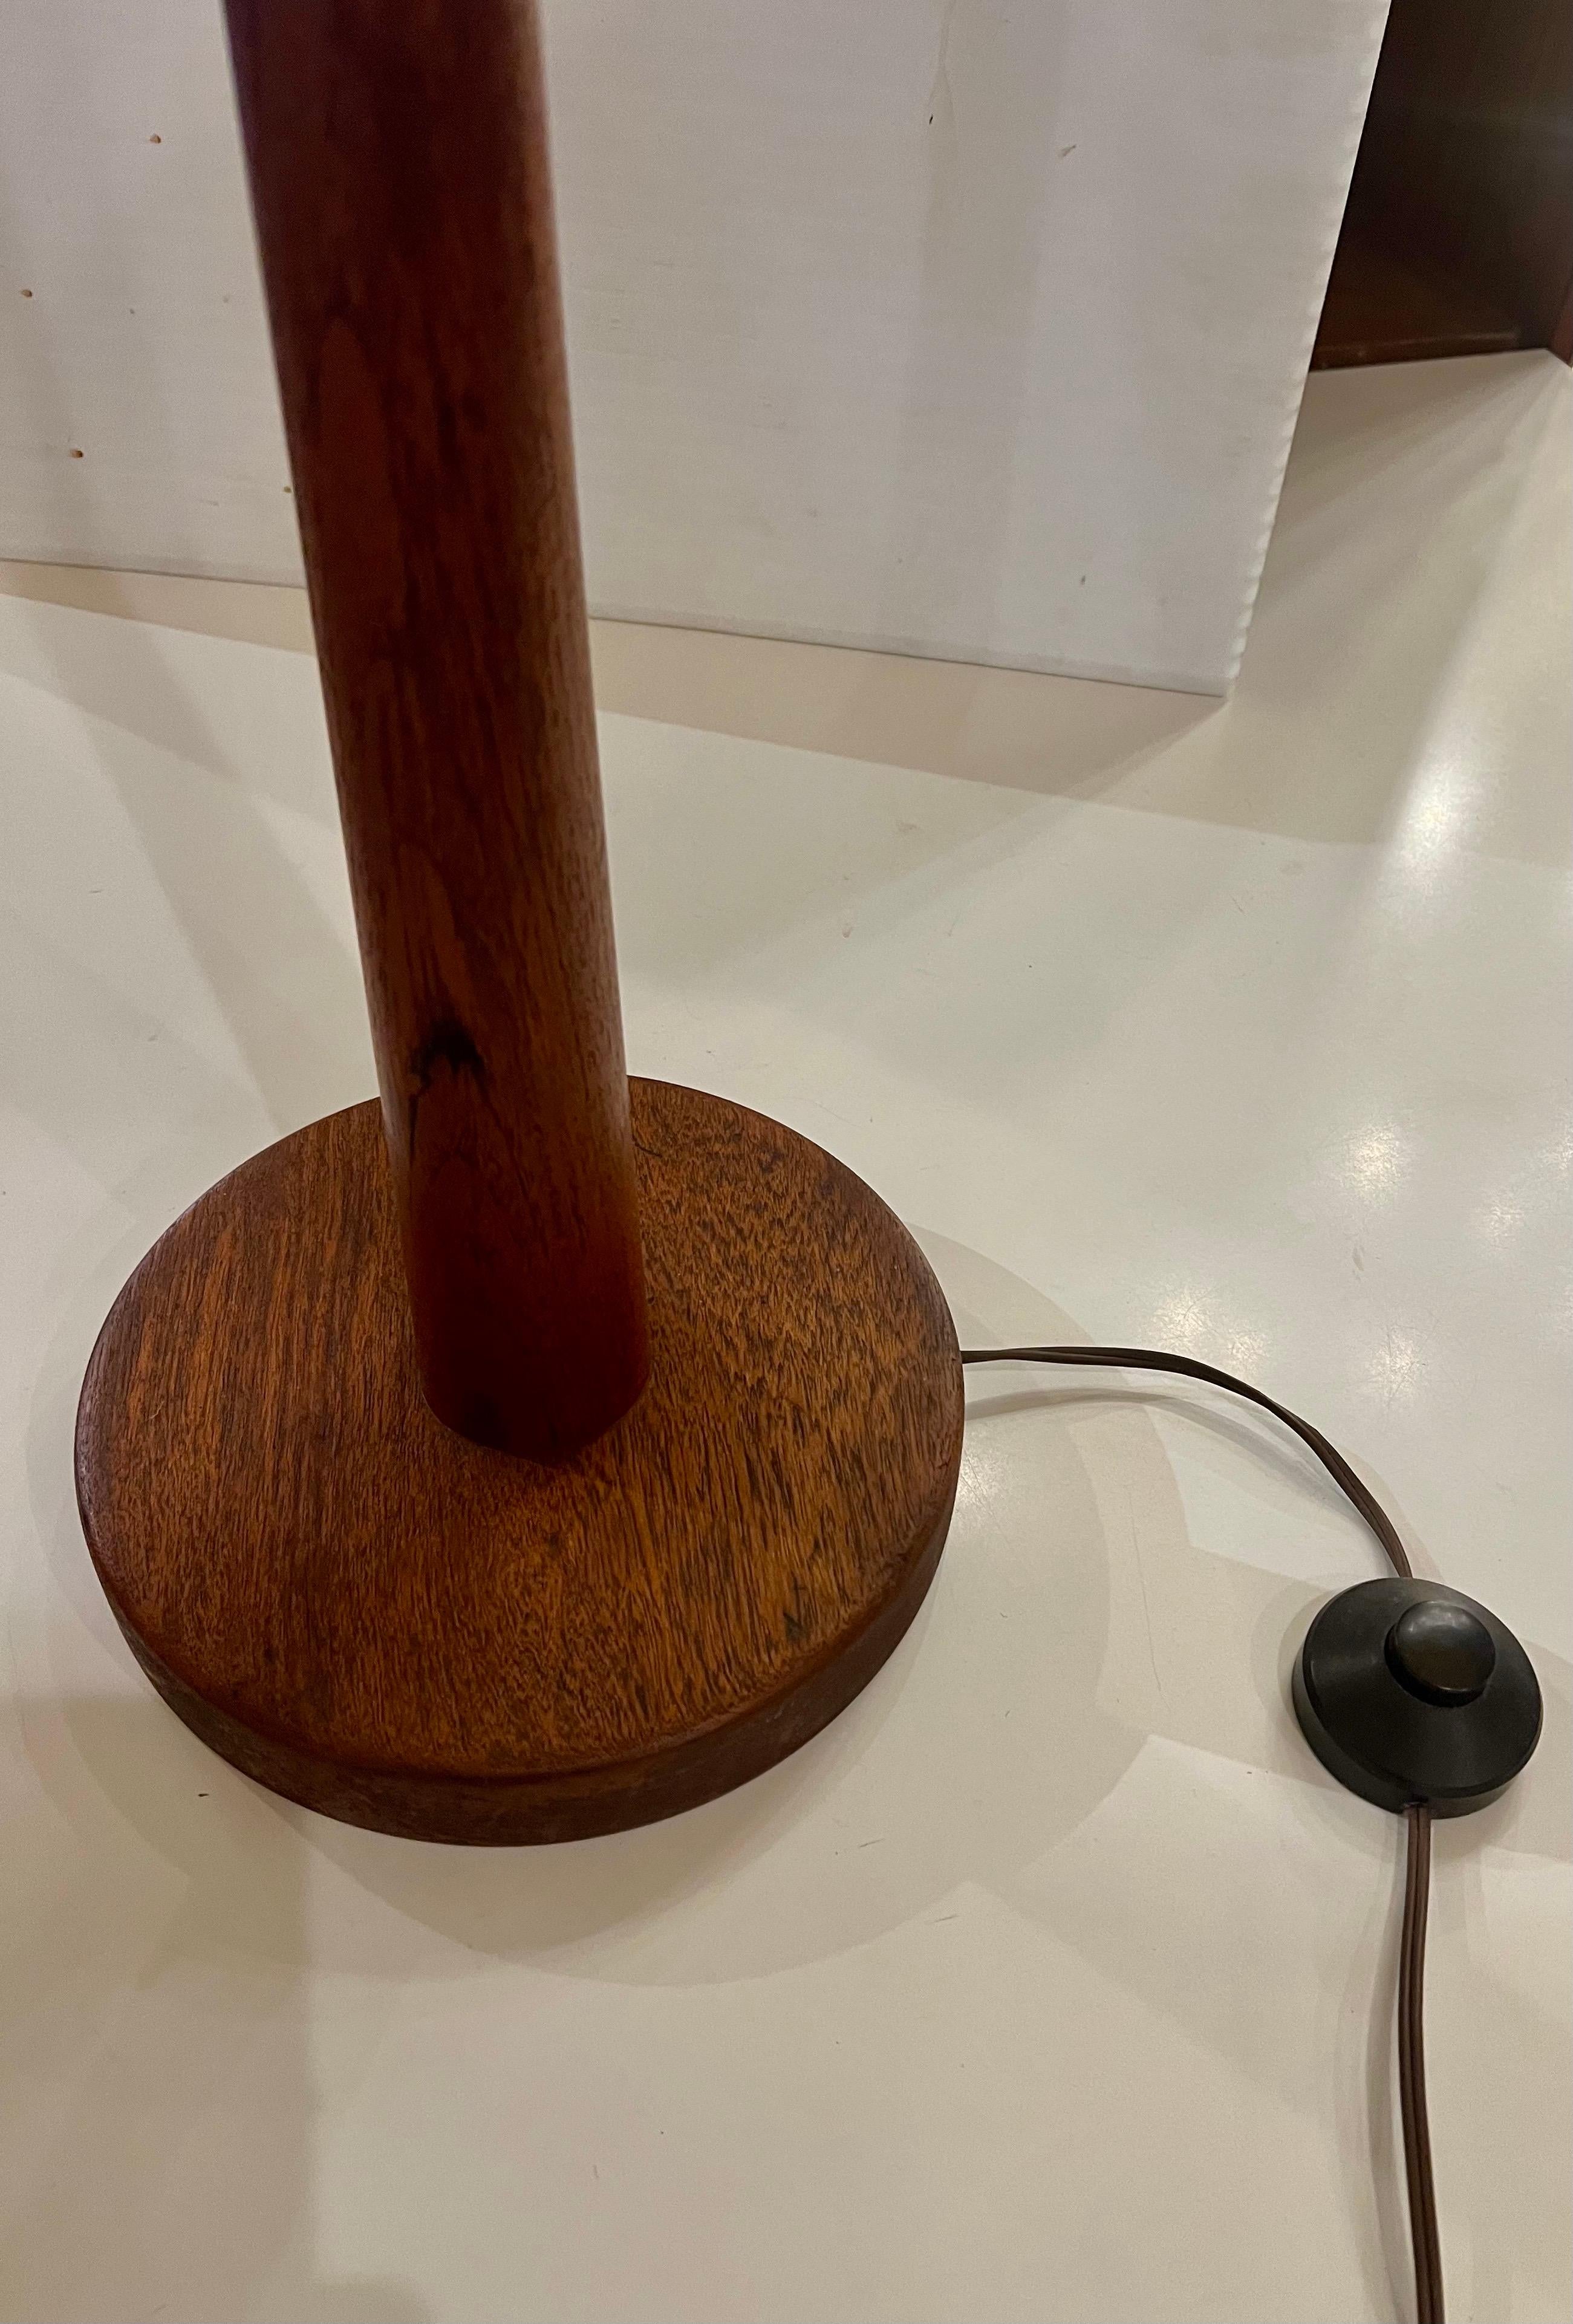 1950s Danish Modern Solid Teak Tall Floor Lamp In Good Condition For Sale In San Diego, CA